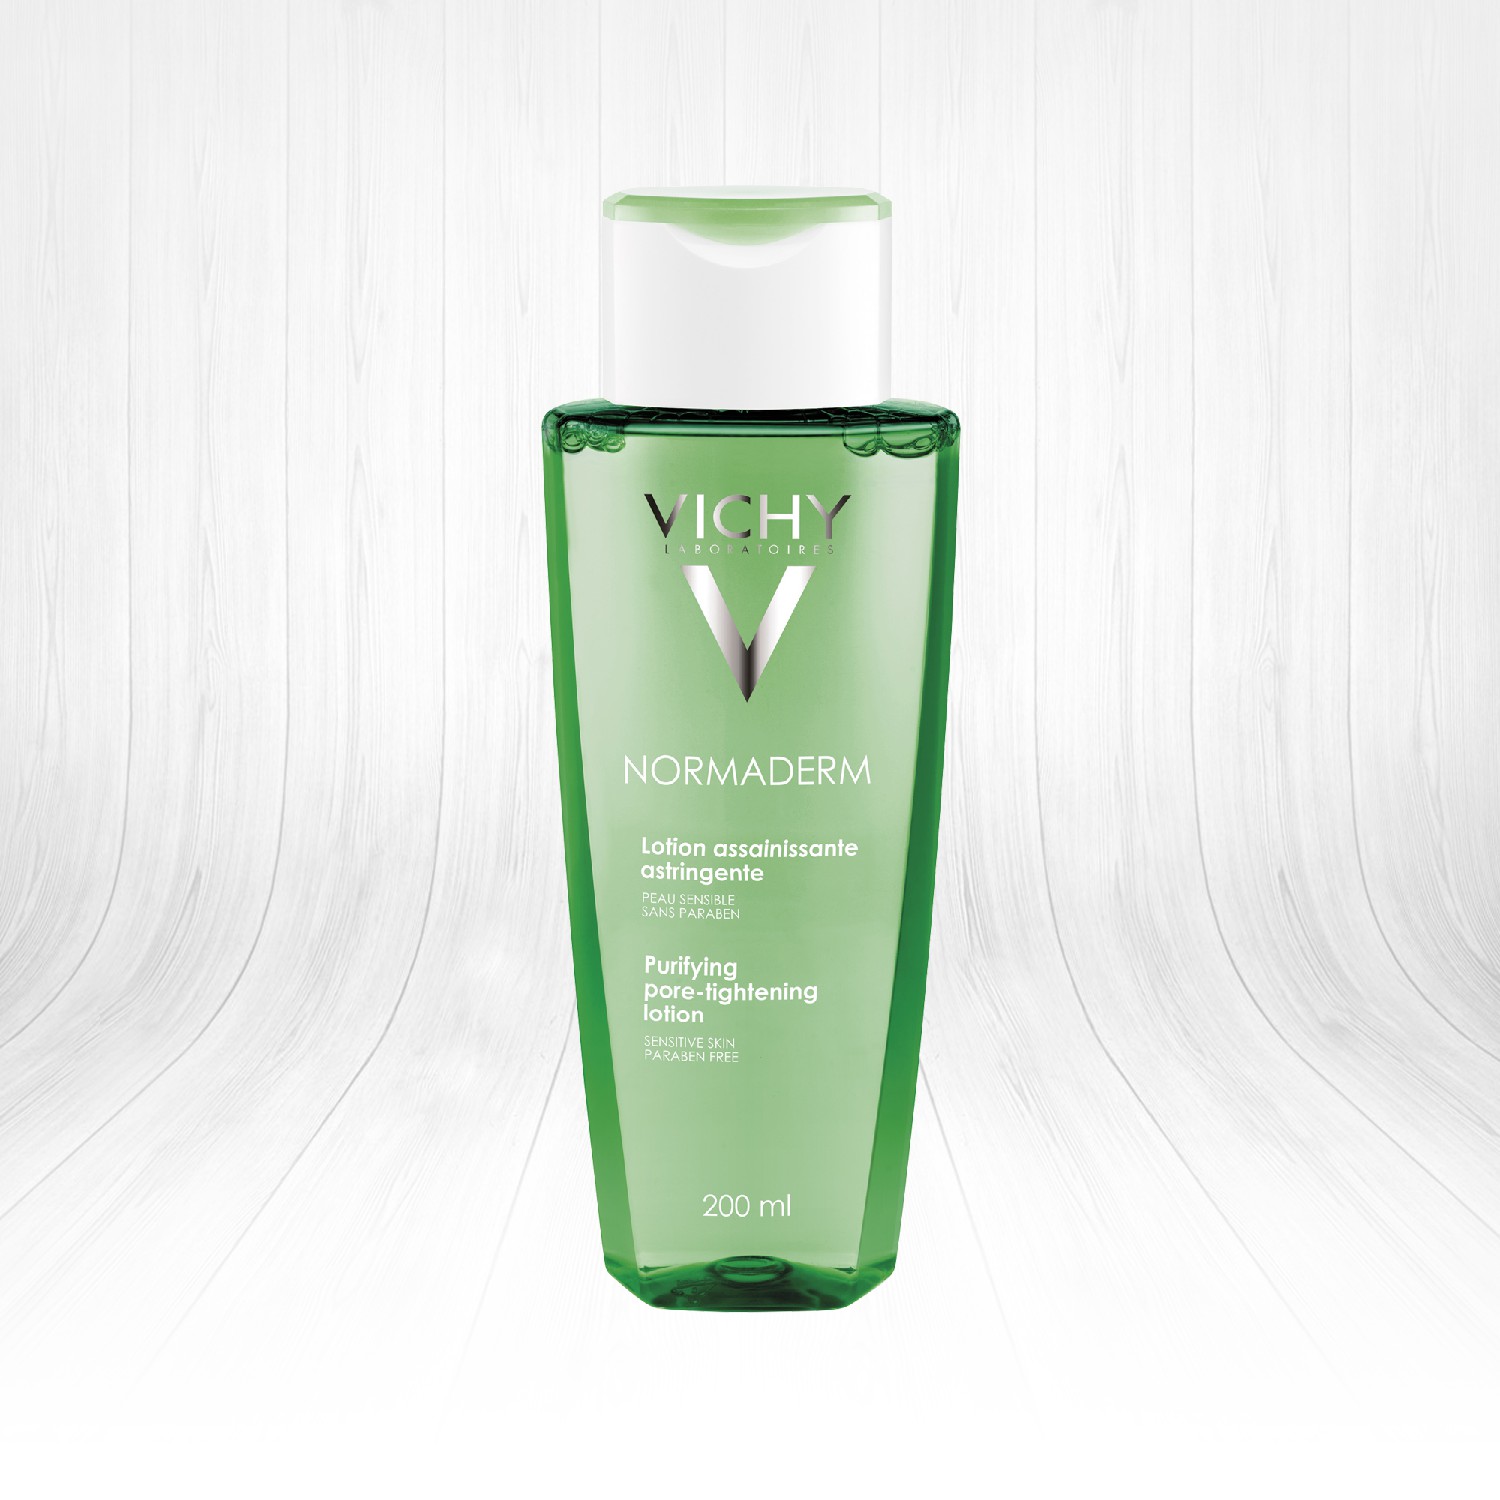 Vichy Normaderm Lotion